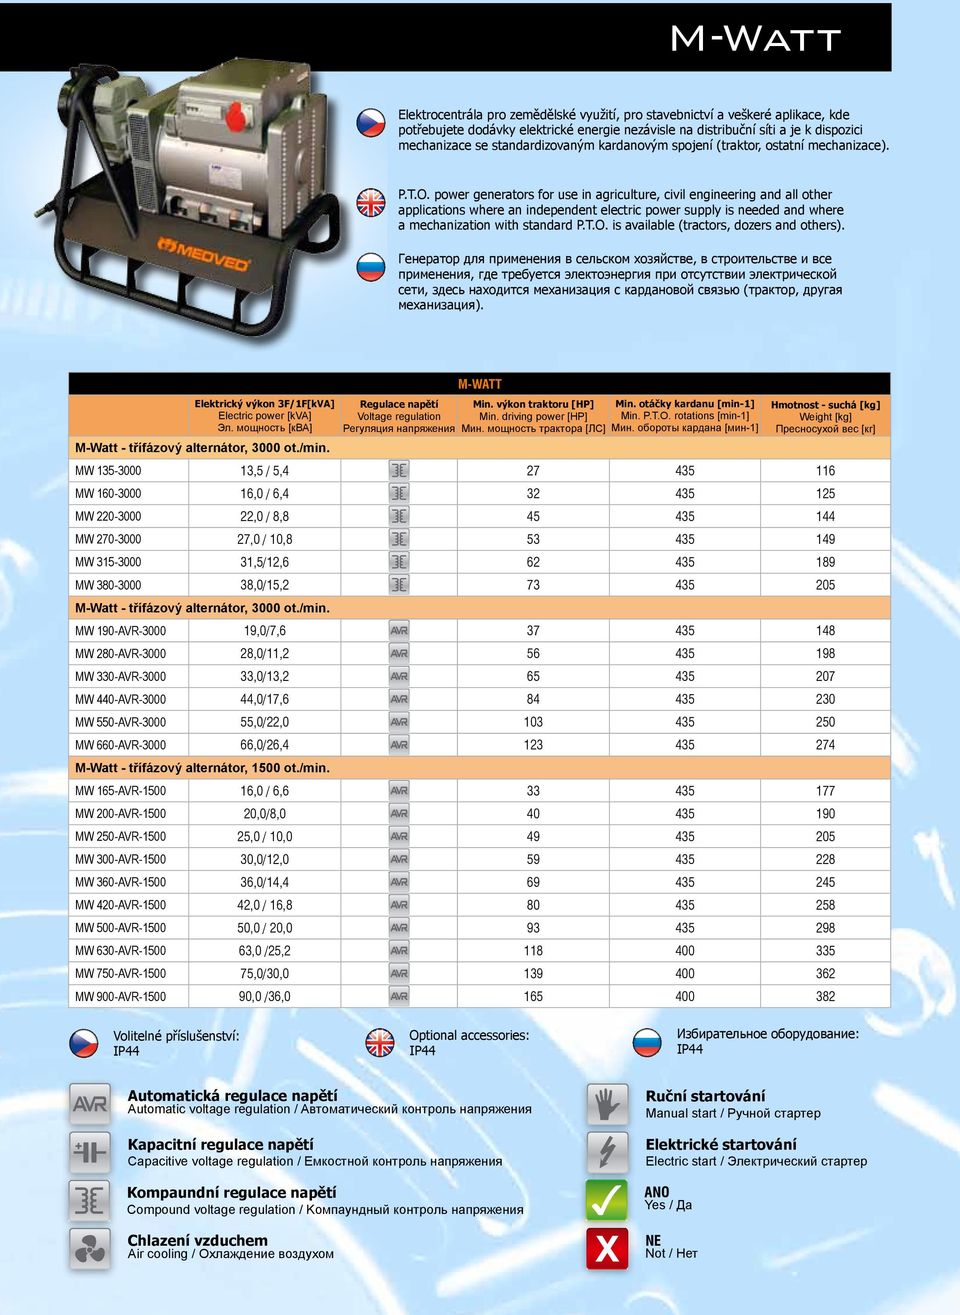 power generators for use in agriculture, civil engineering and all other applications where an independent electric power supply is needed and where a mechanization with standard P.T.O.